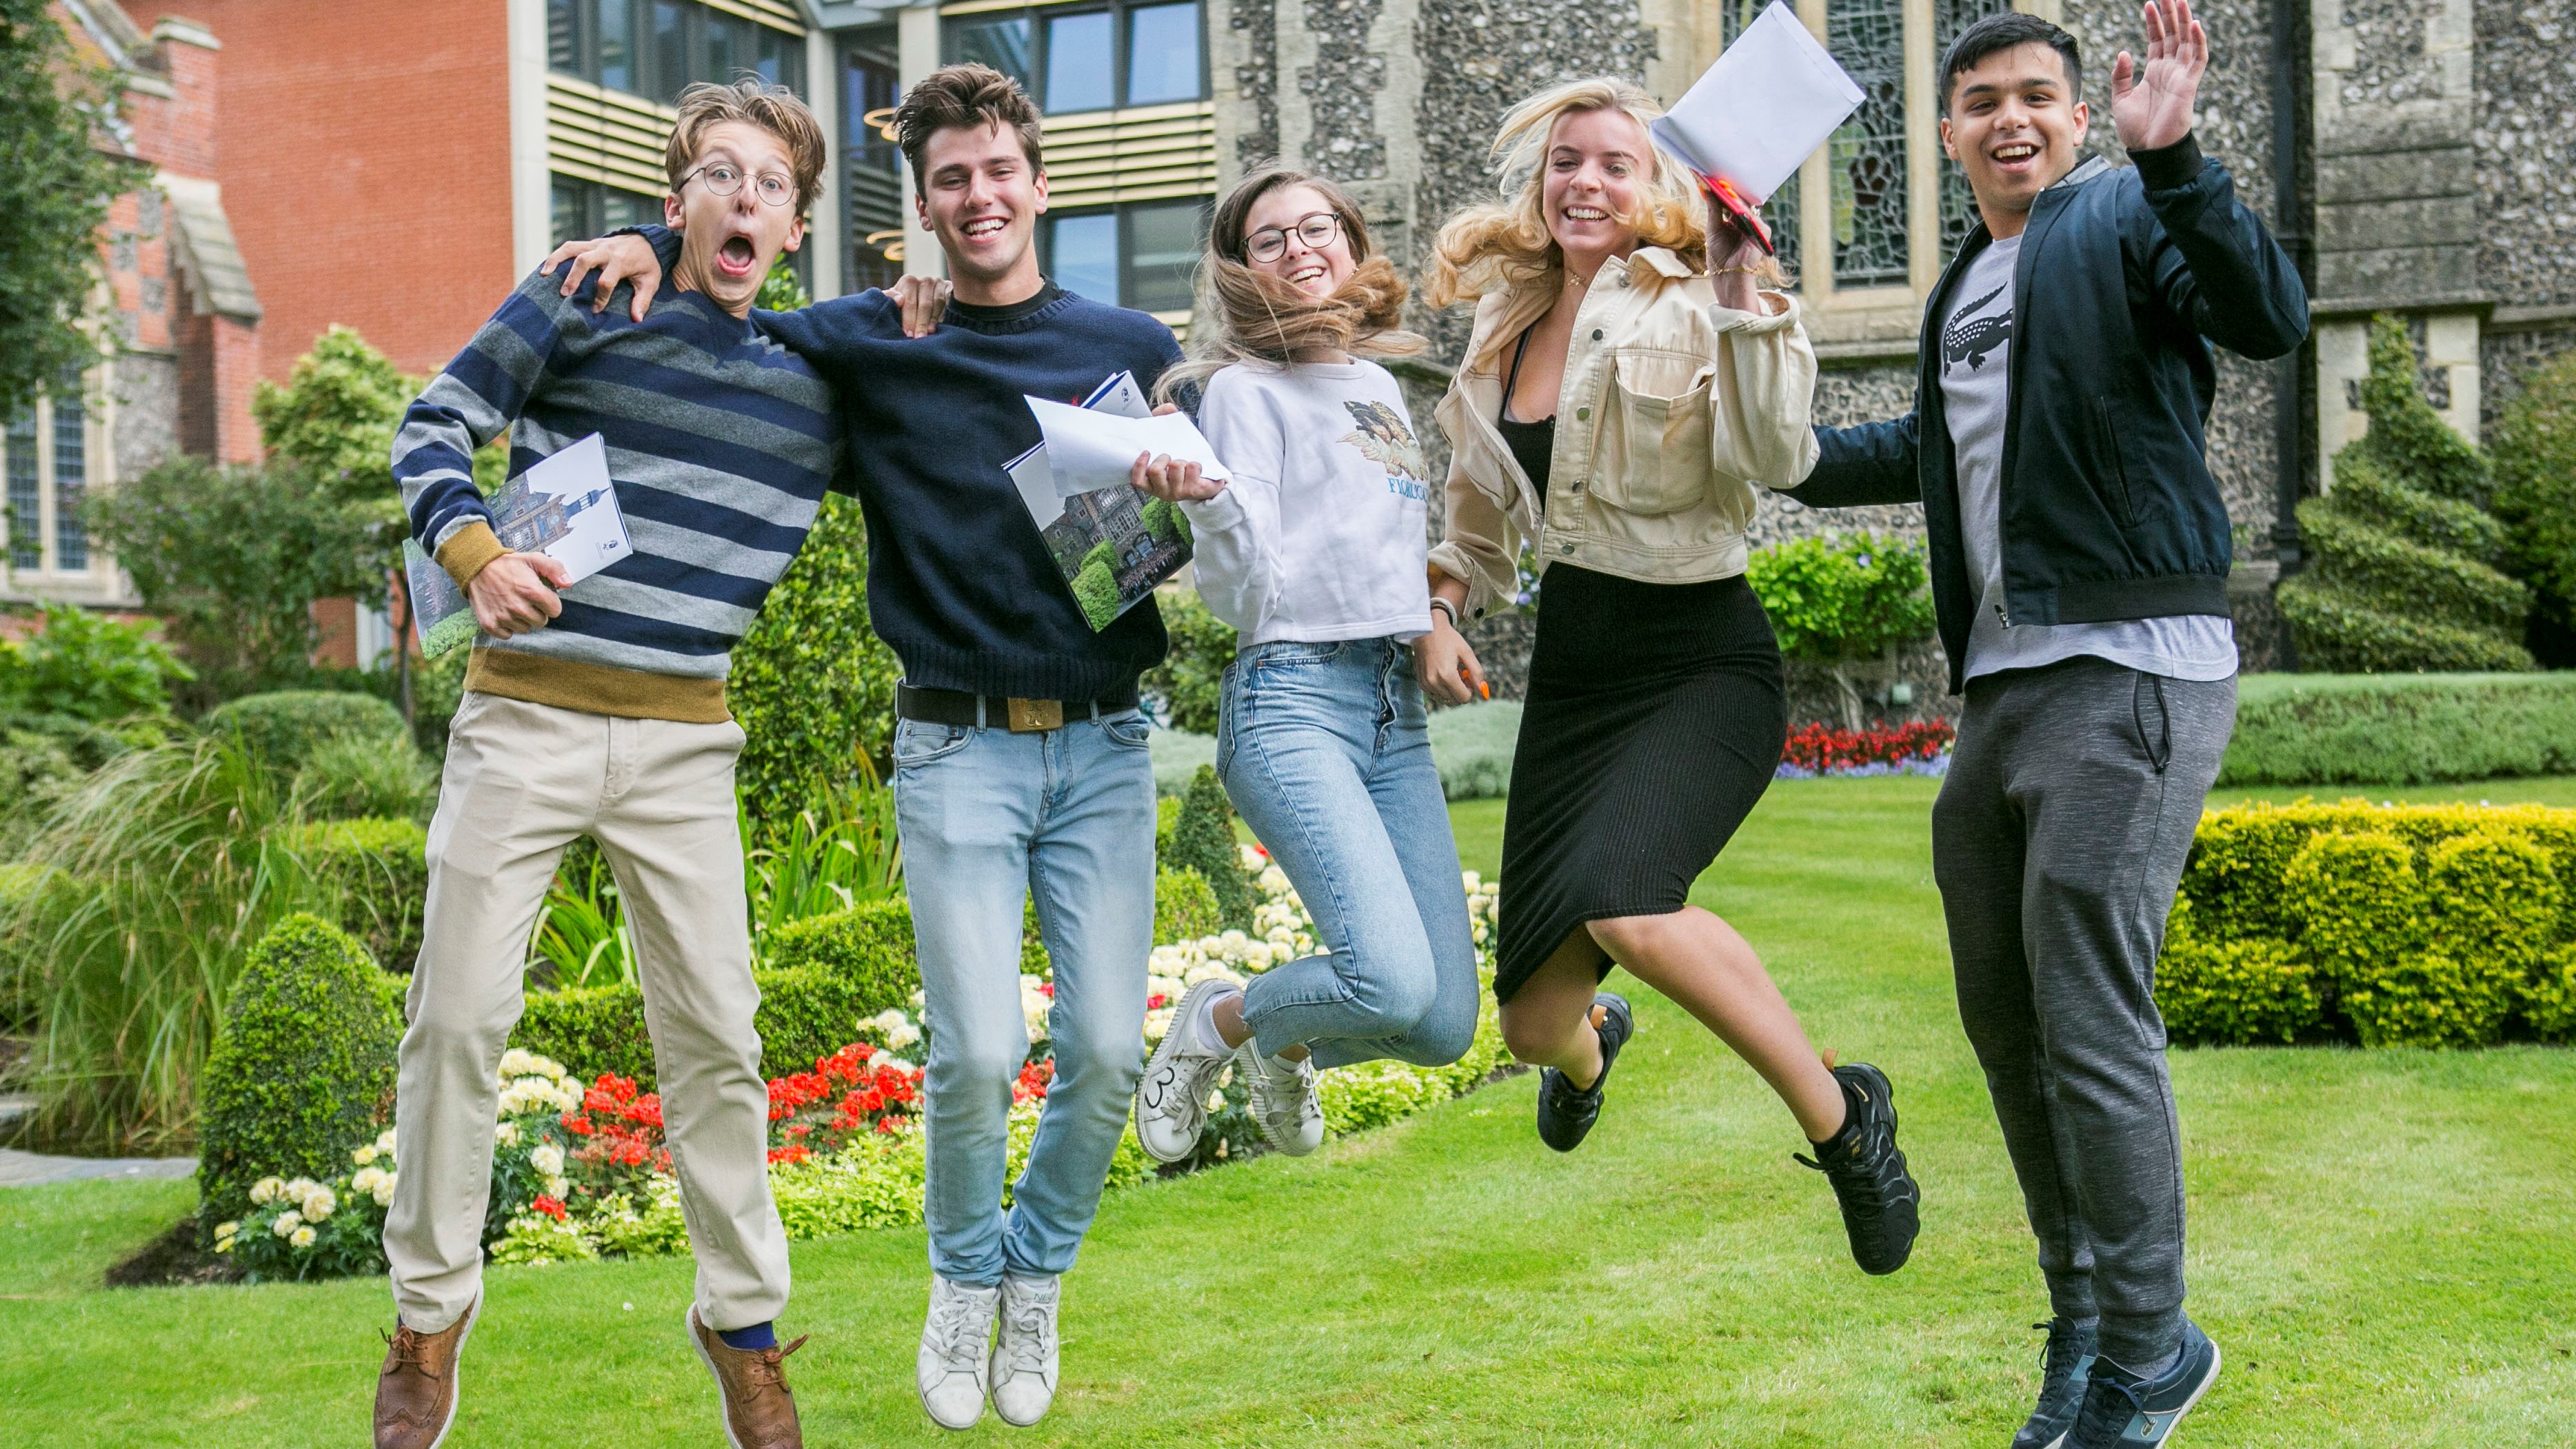 A-level results 2019 cropped (15).jpg